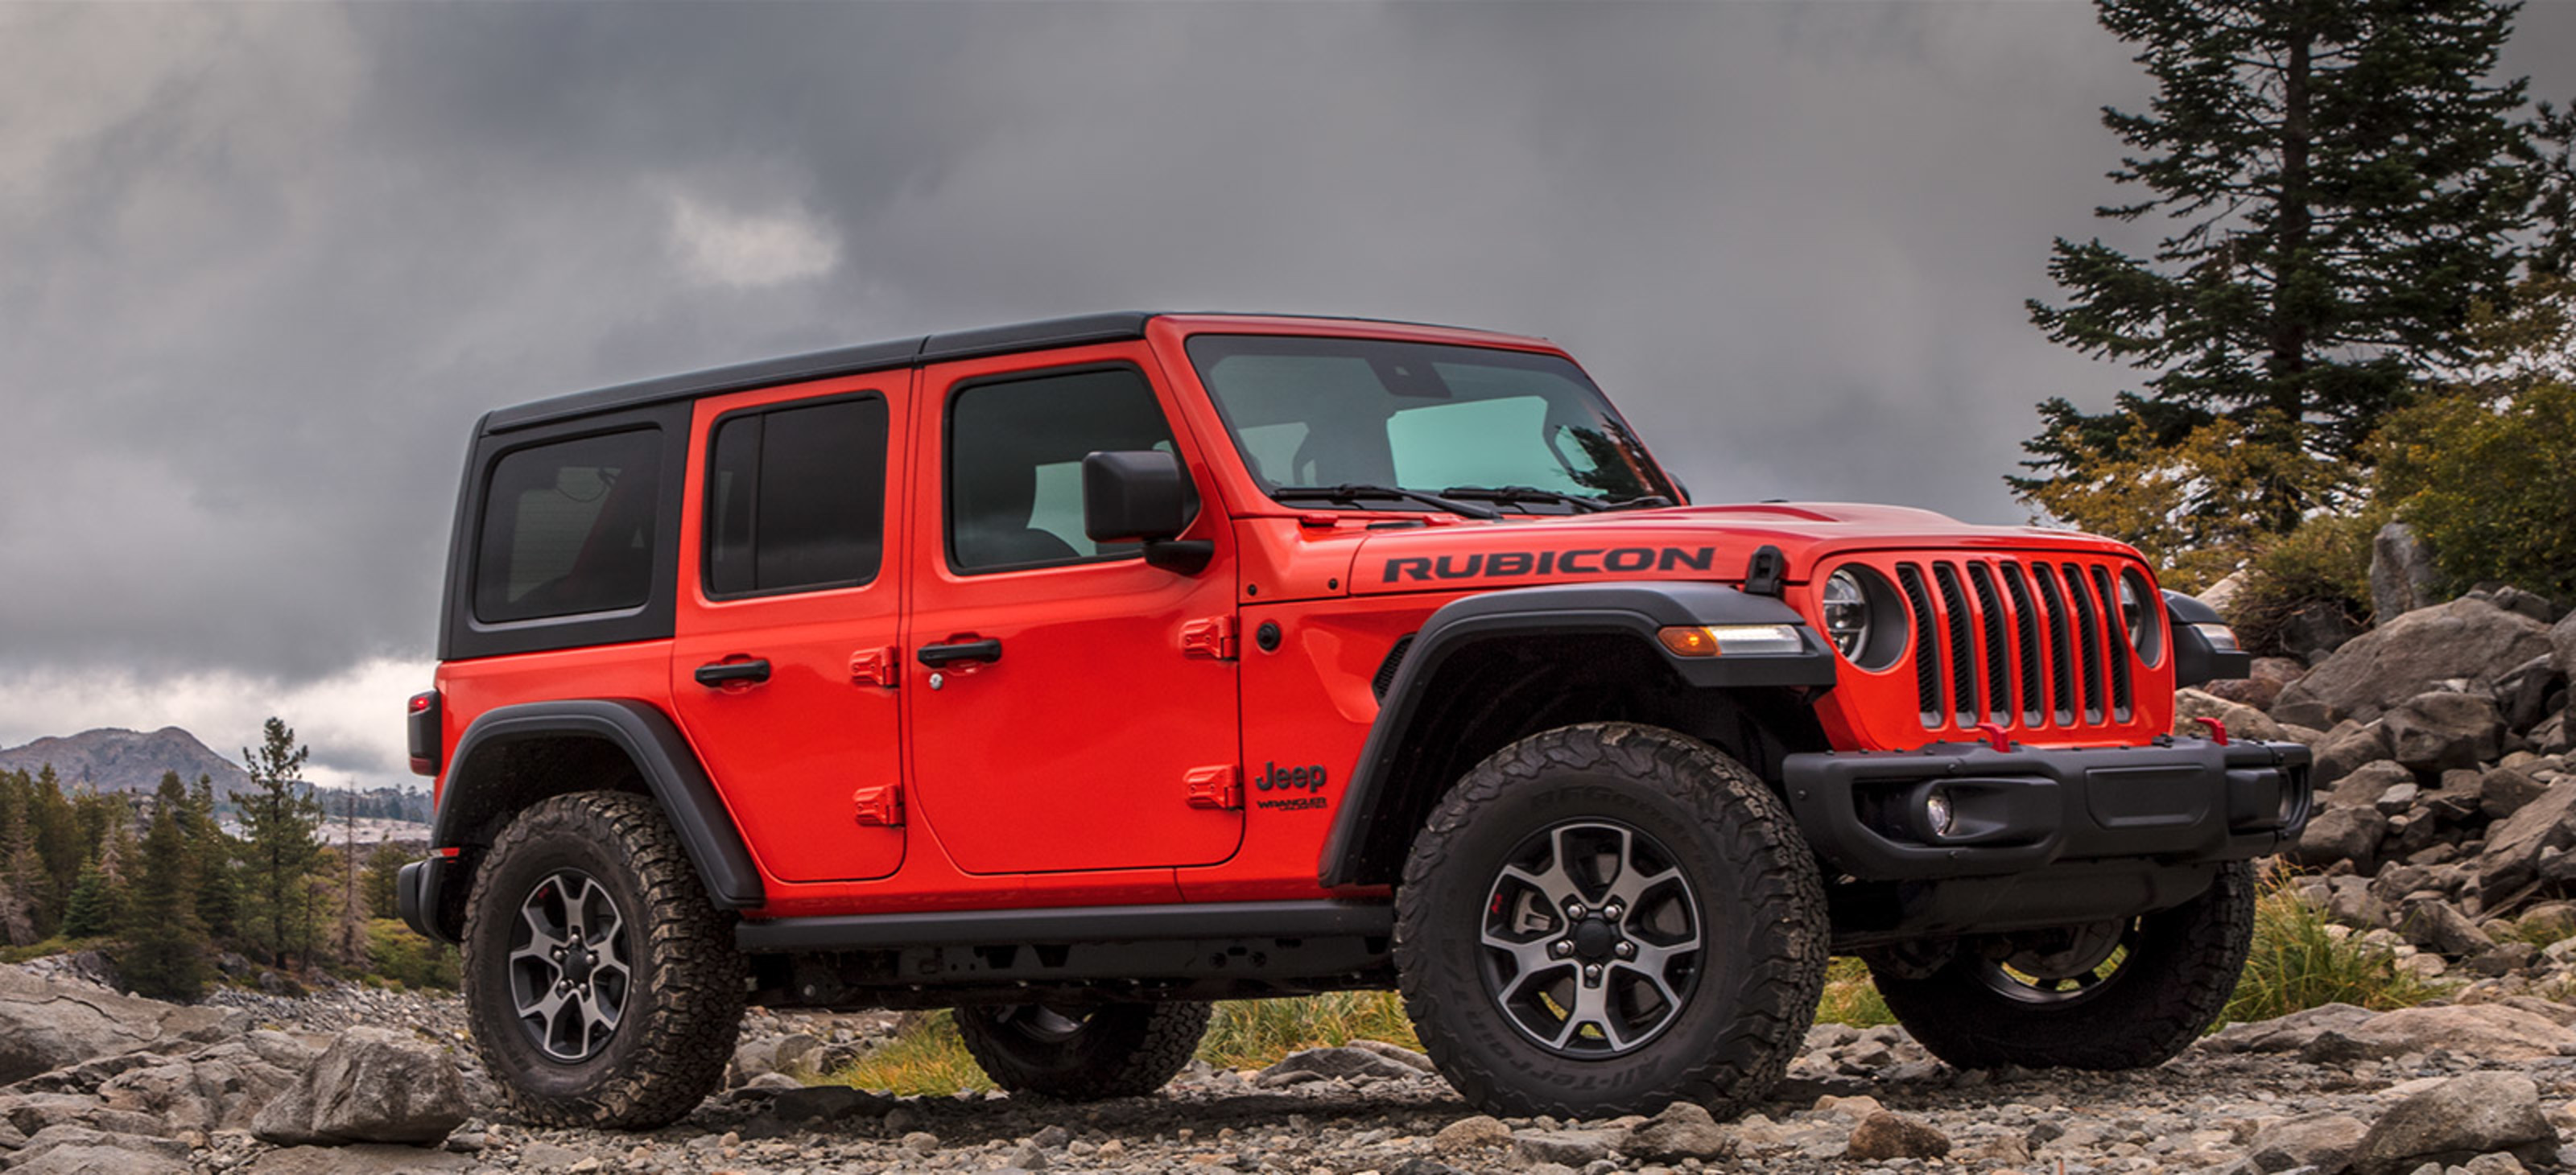 A side view of a four-door Firecracker Red 2021 Jeep Wrangler Rubicon parked on rocky terrain in the wilderness.
